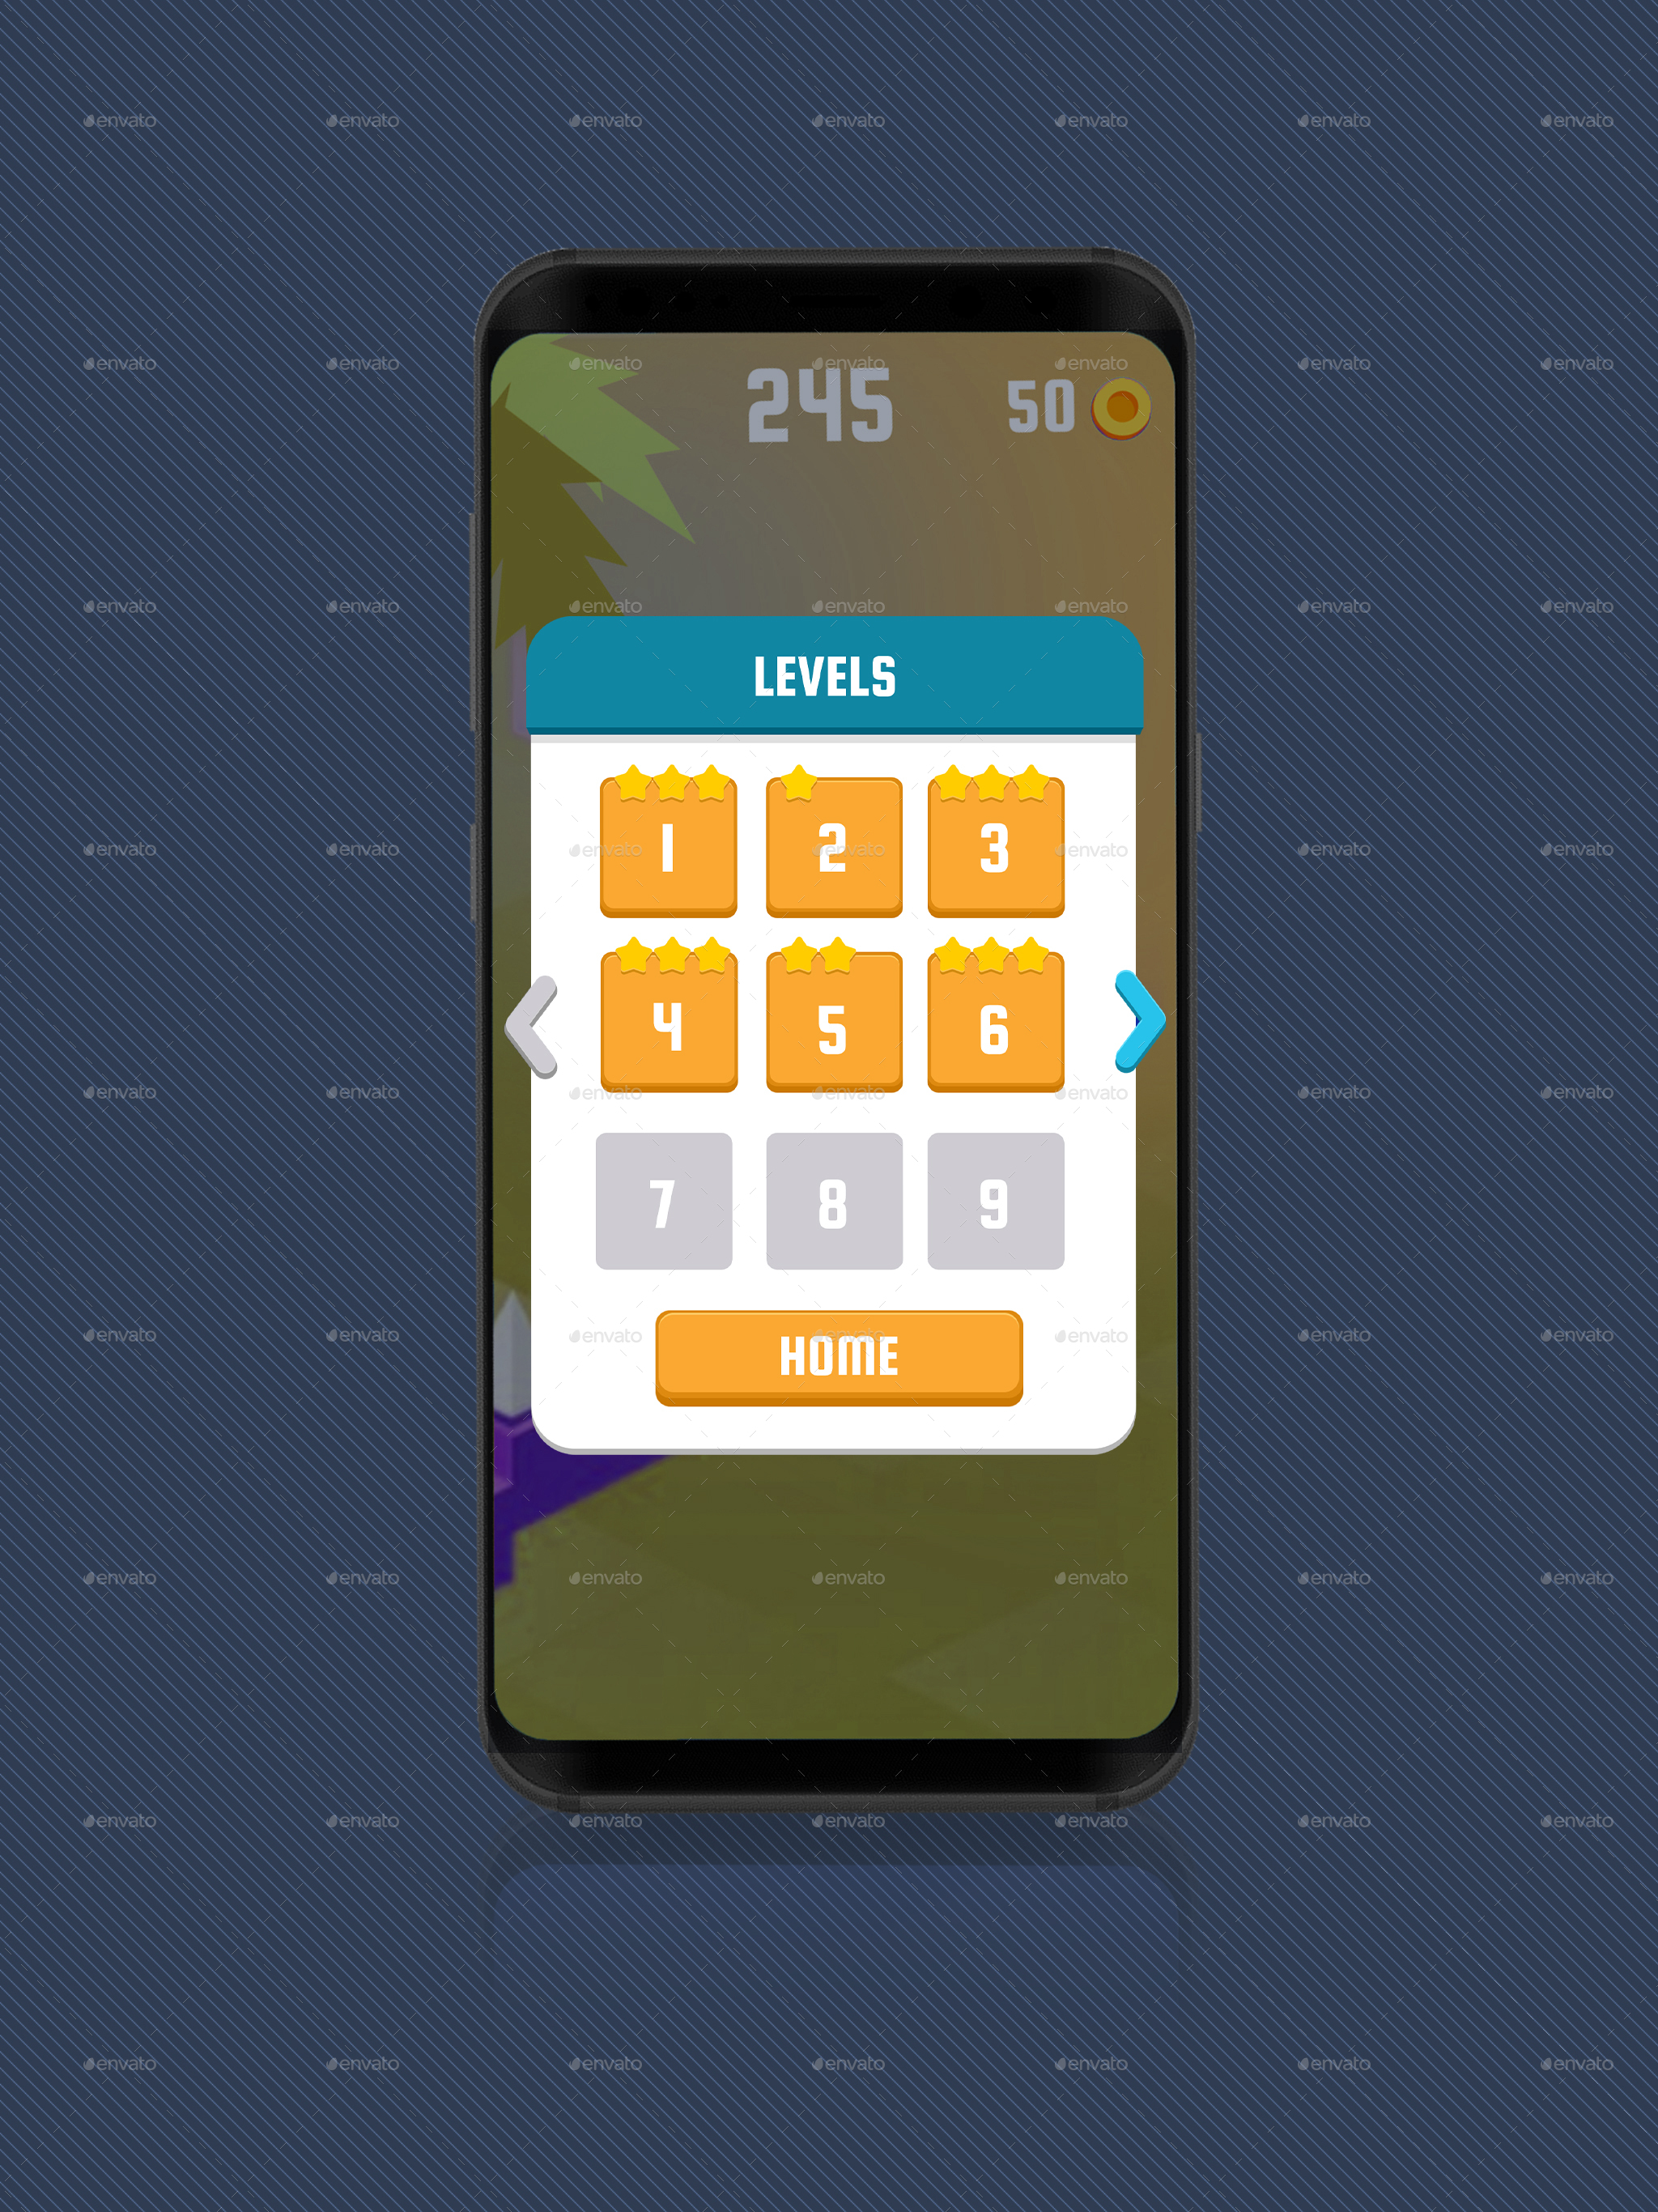 Flat Game UI Pack 2 Caual & Hyper Casual Game by themkazmi | GraphicRiver